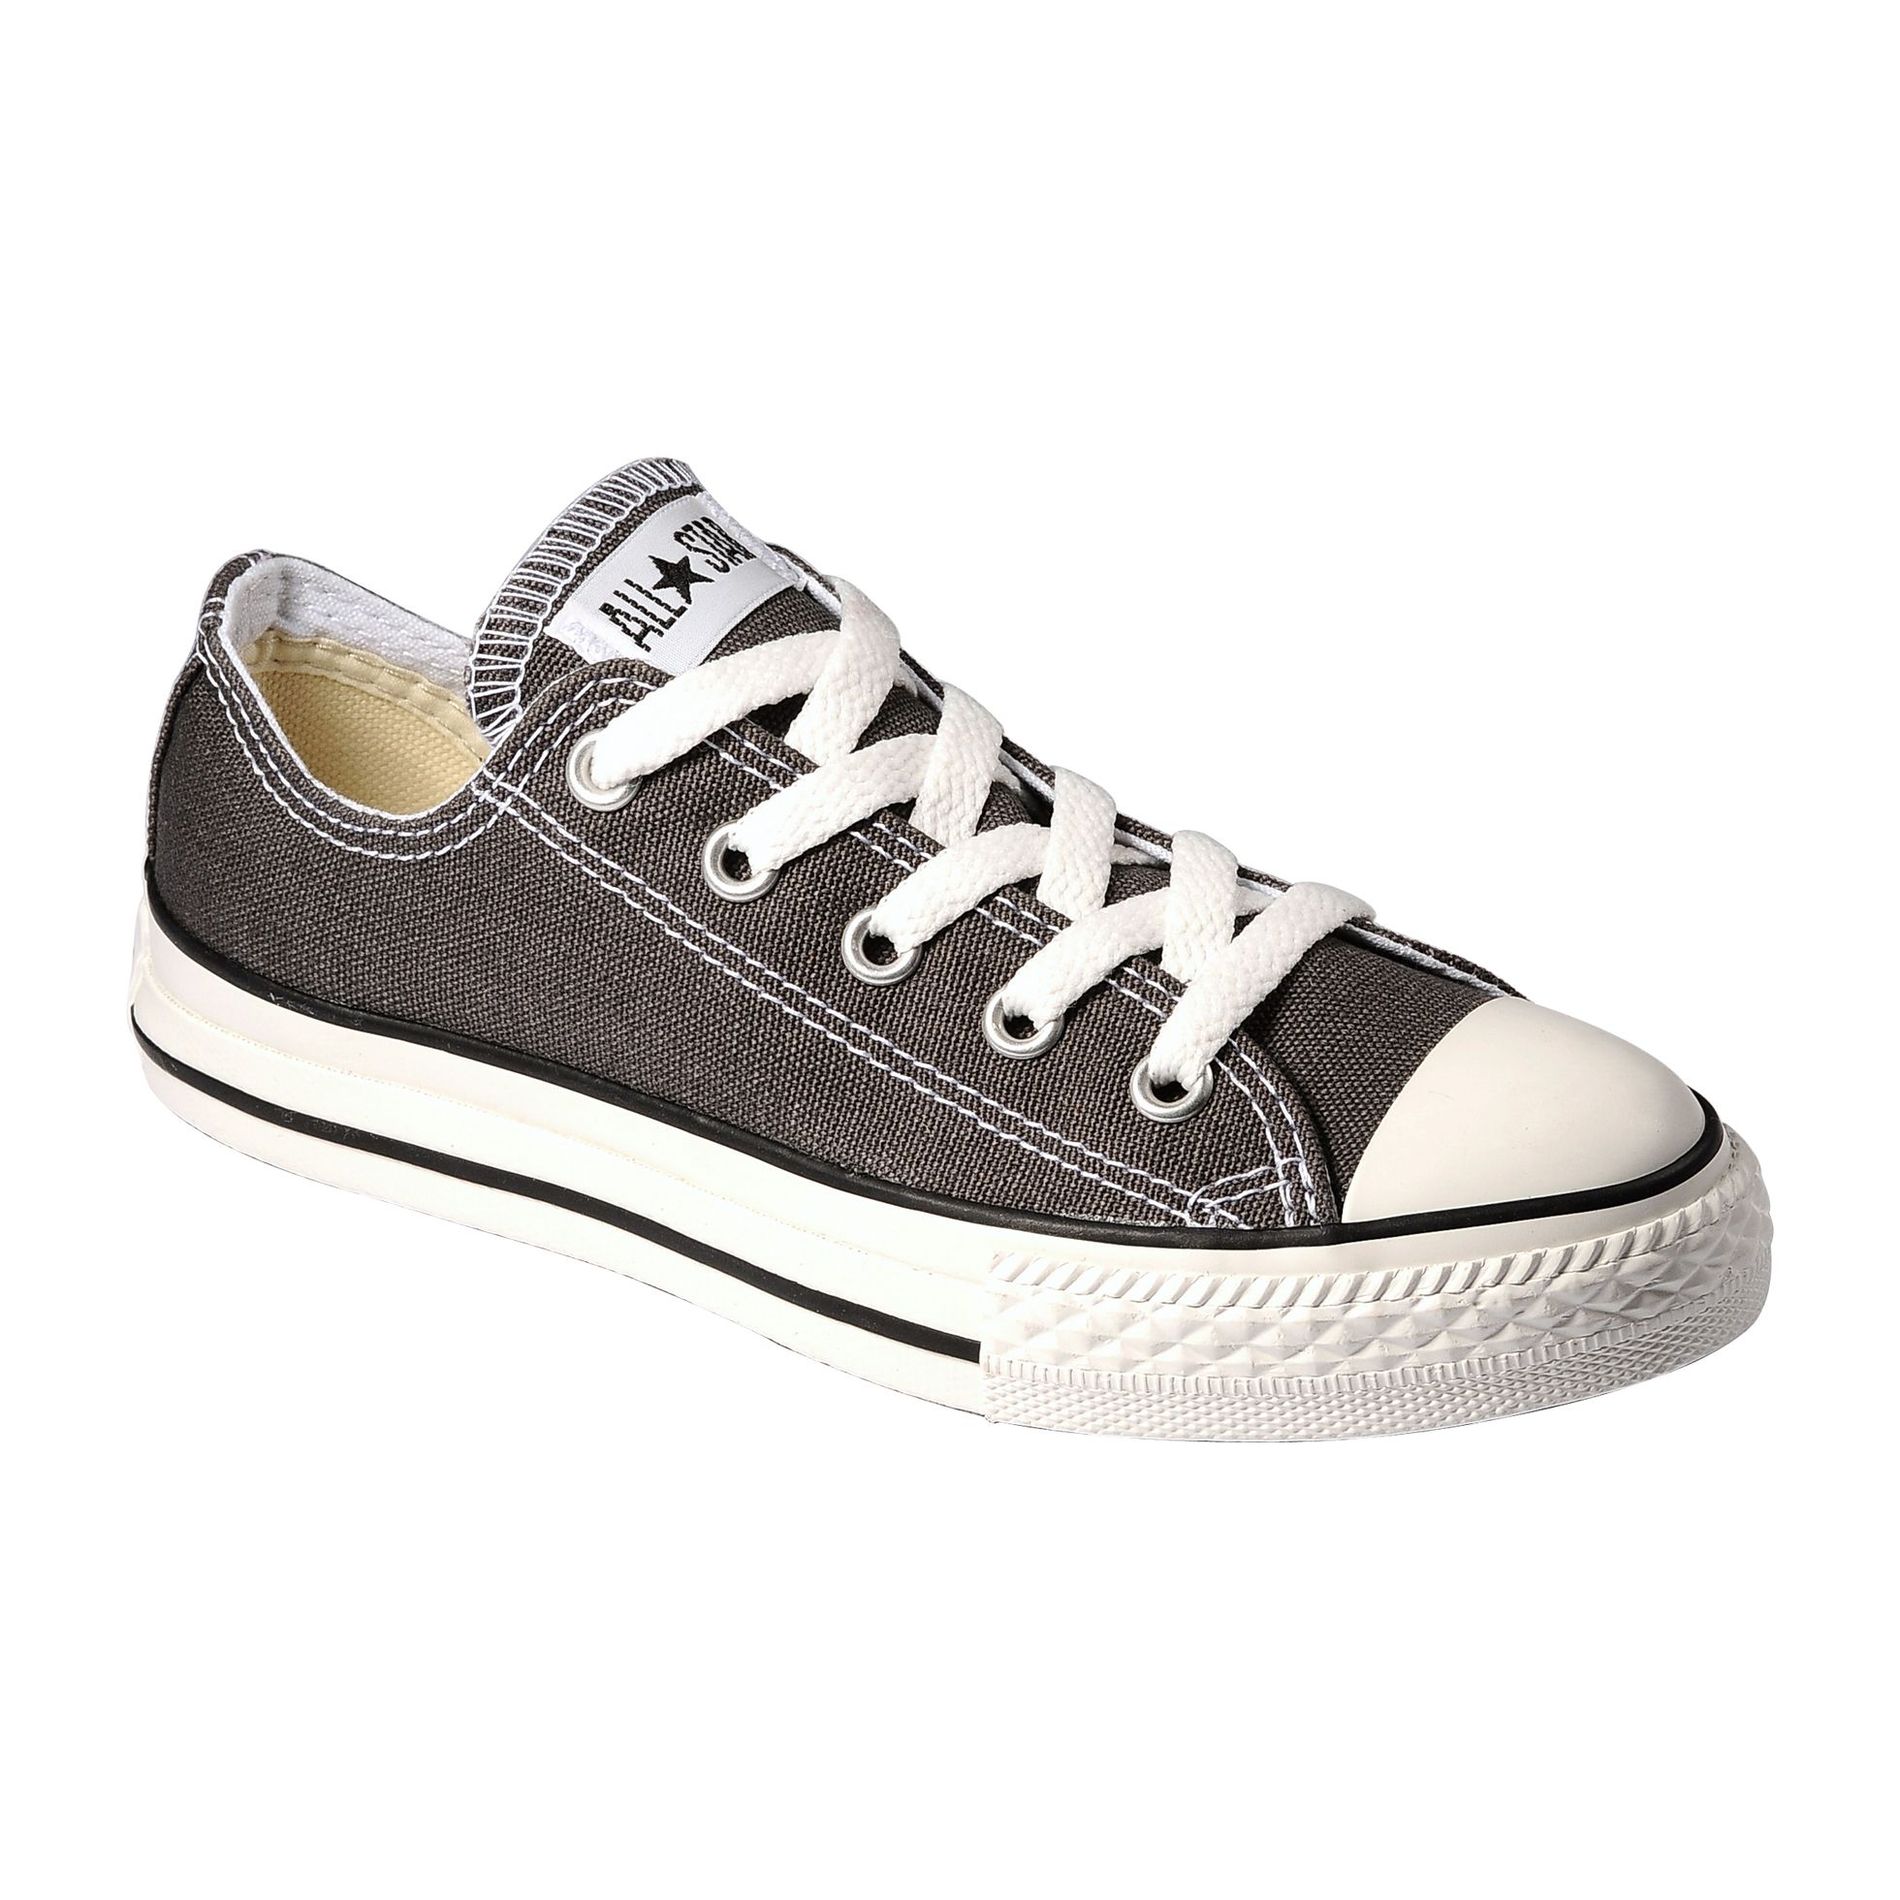 Youth Chuck Taylor All Star Oxford Shoe - Grey